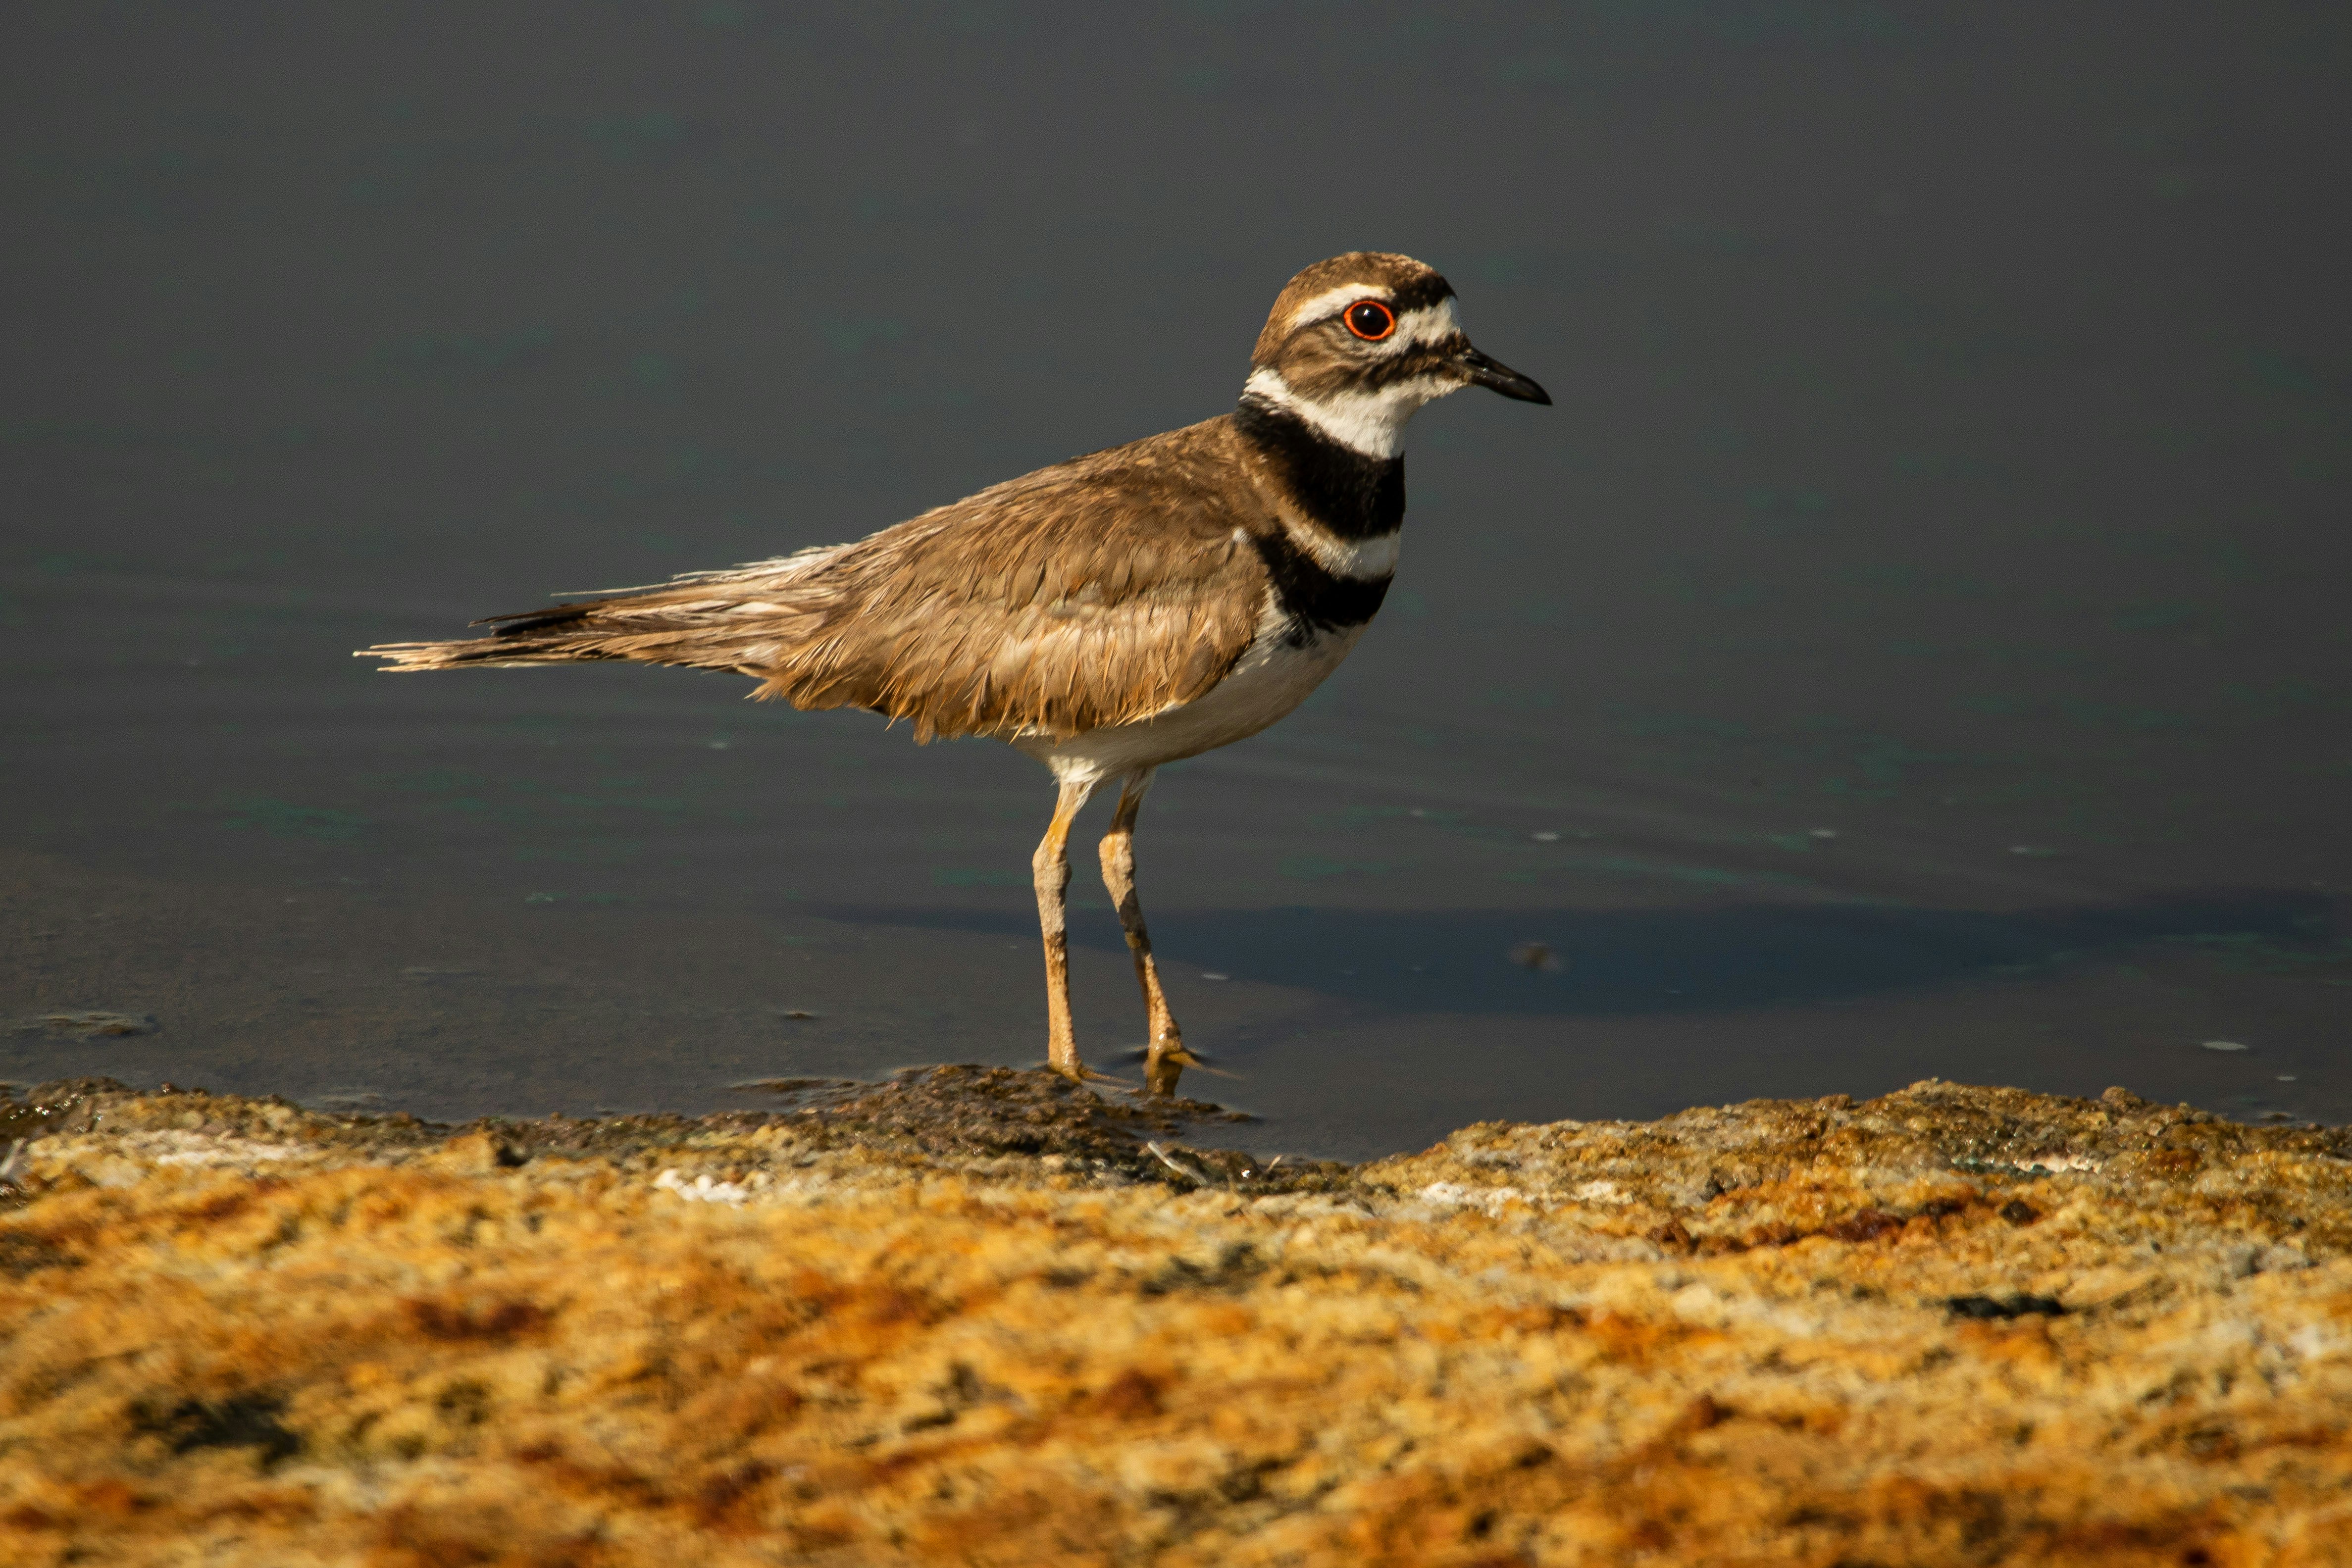 white and brown bird on brown sand during daytime